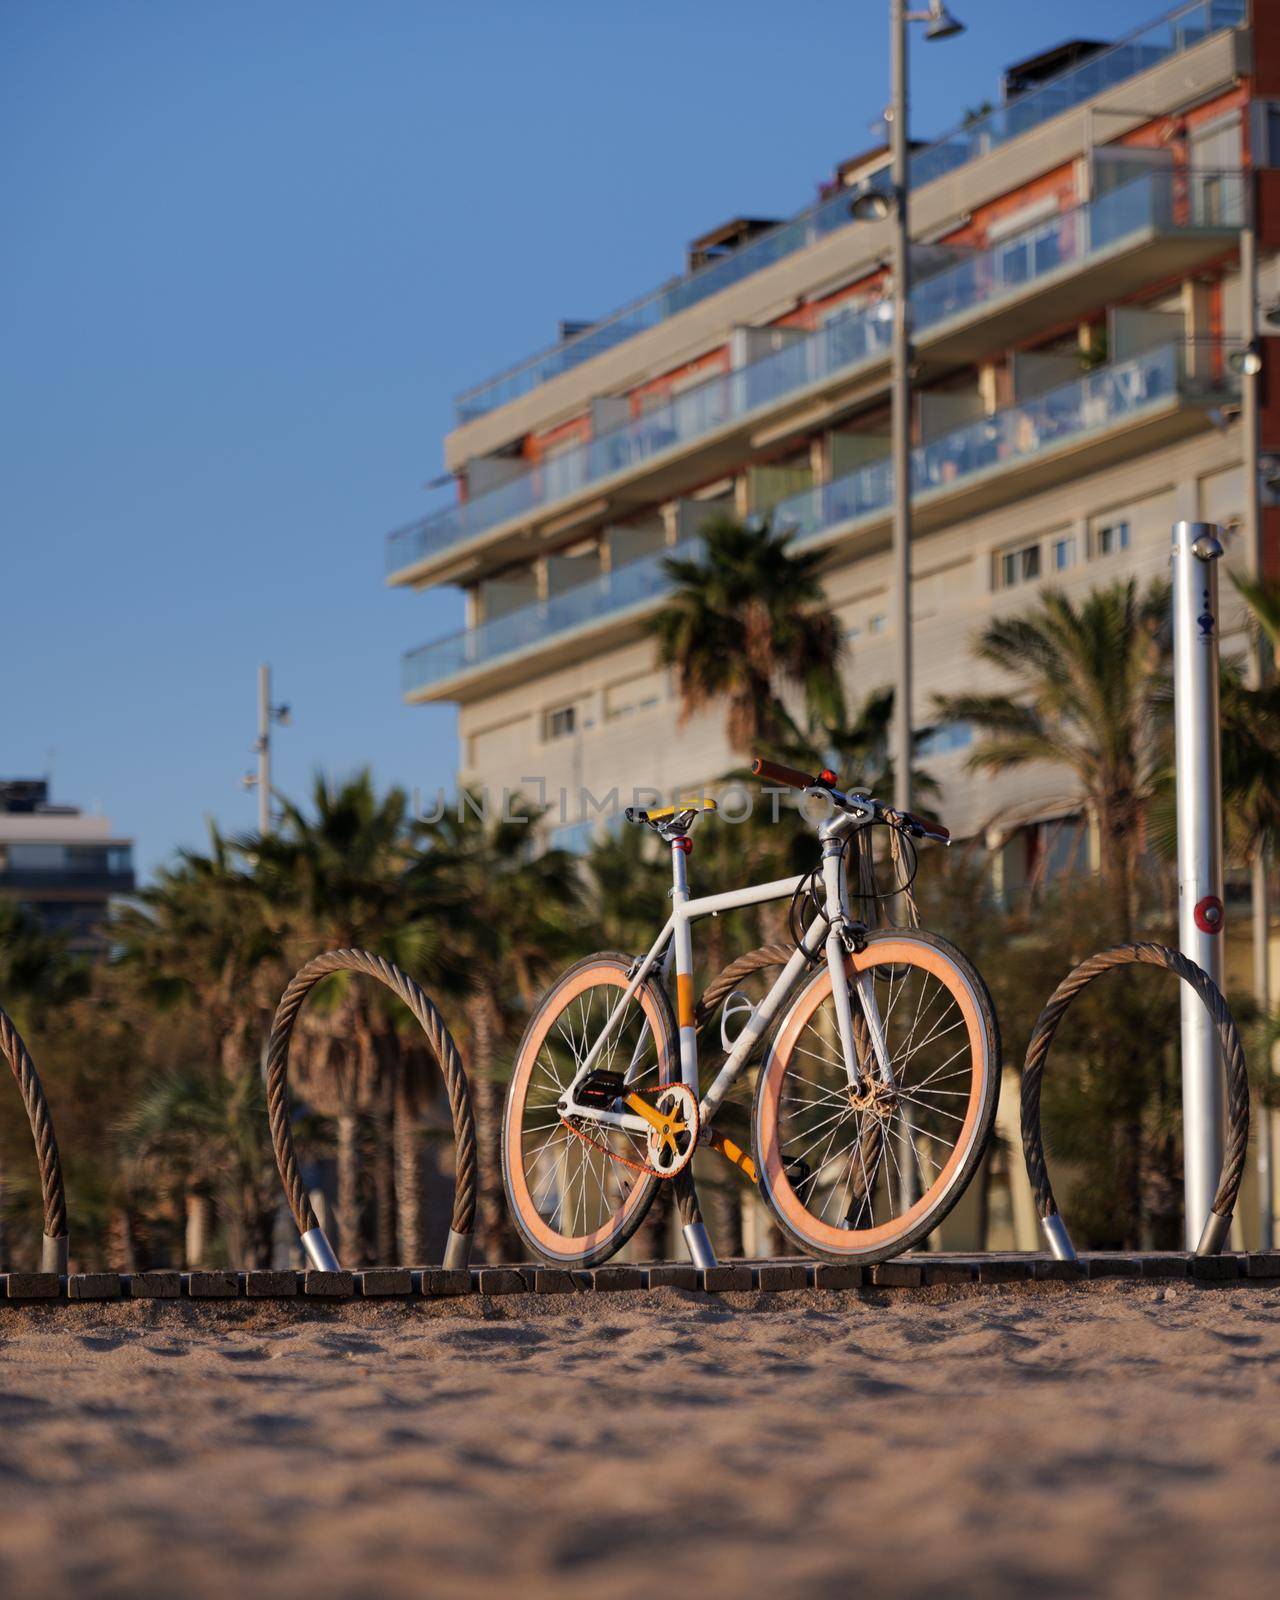 Bicycle with orange wheels parcked at the beach during sunny day. by apavlin